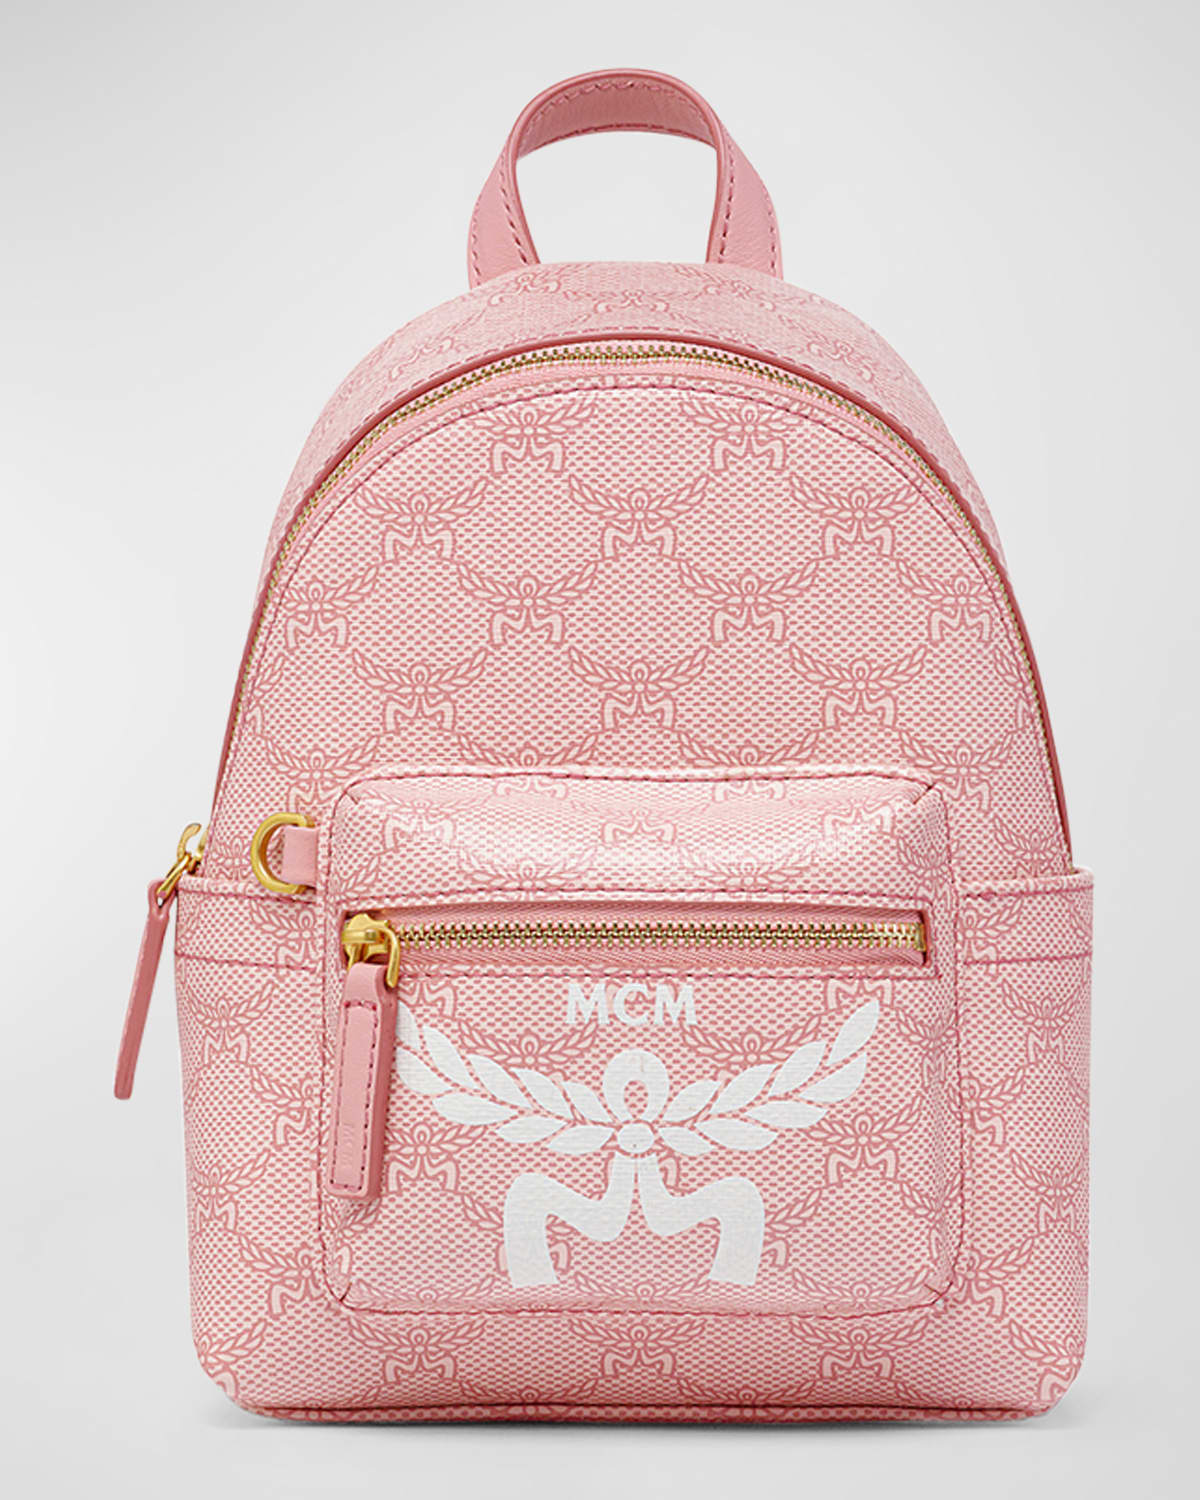 Mcm Stark Monogram Coated Canvas Backpack In Silver/pink